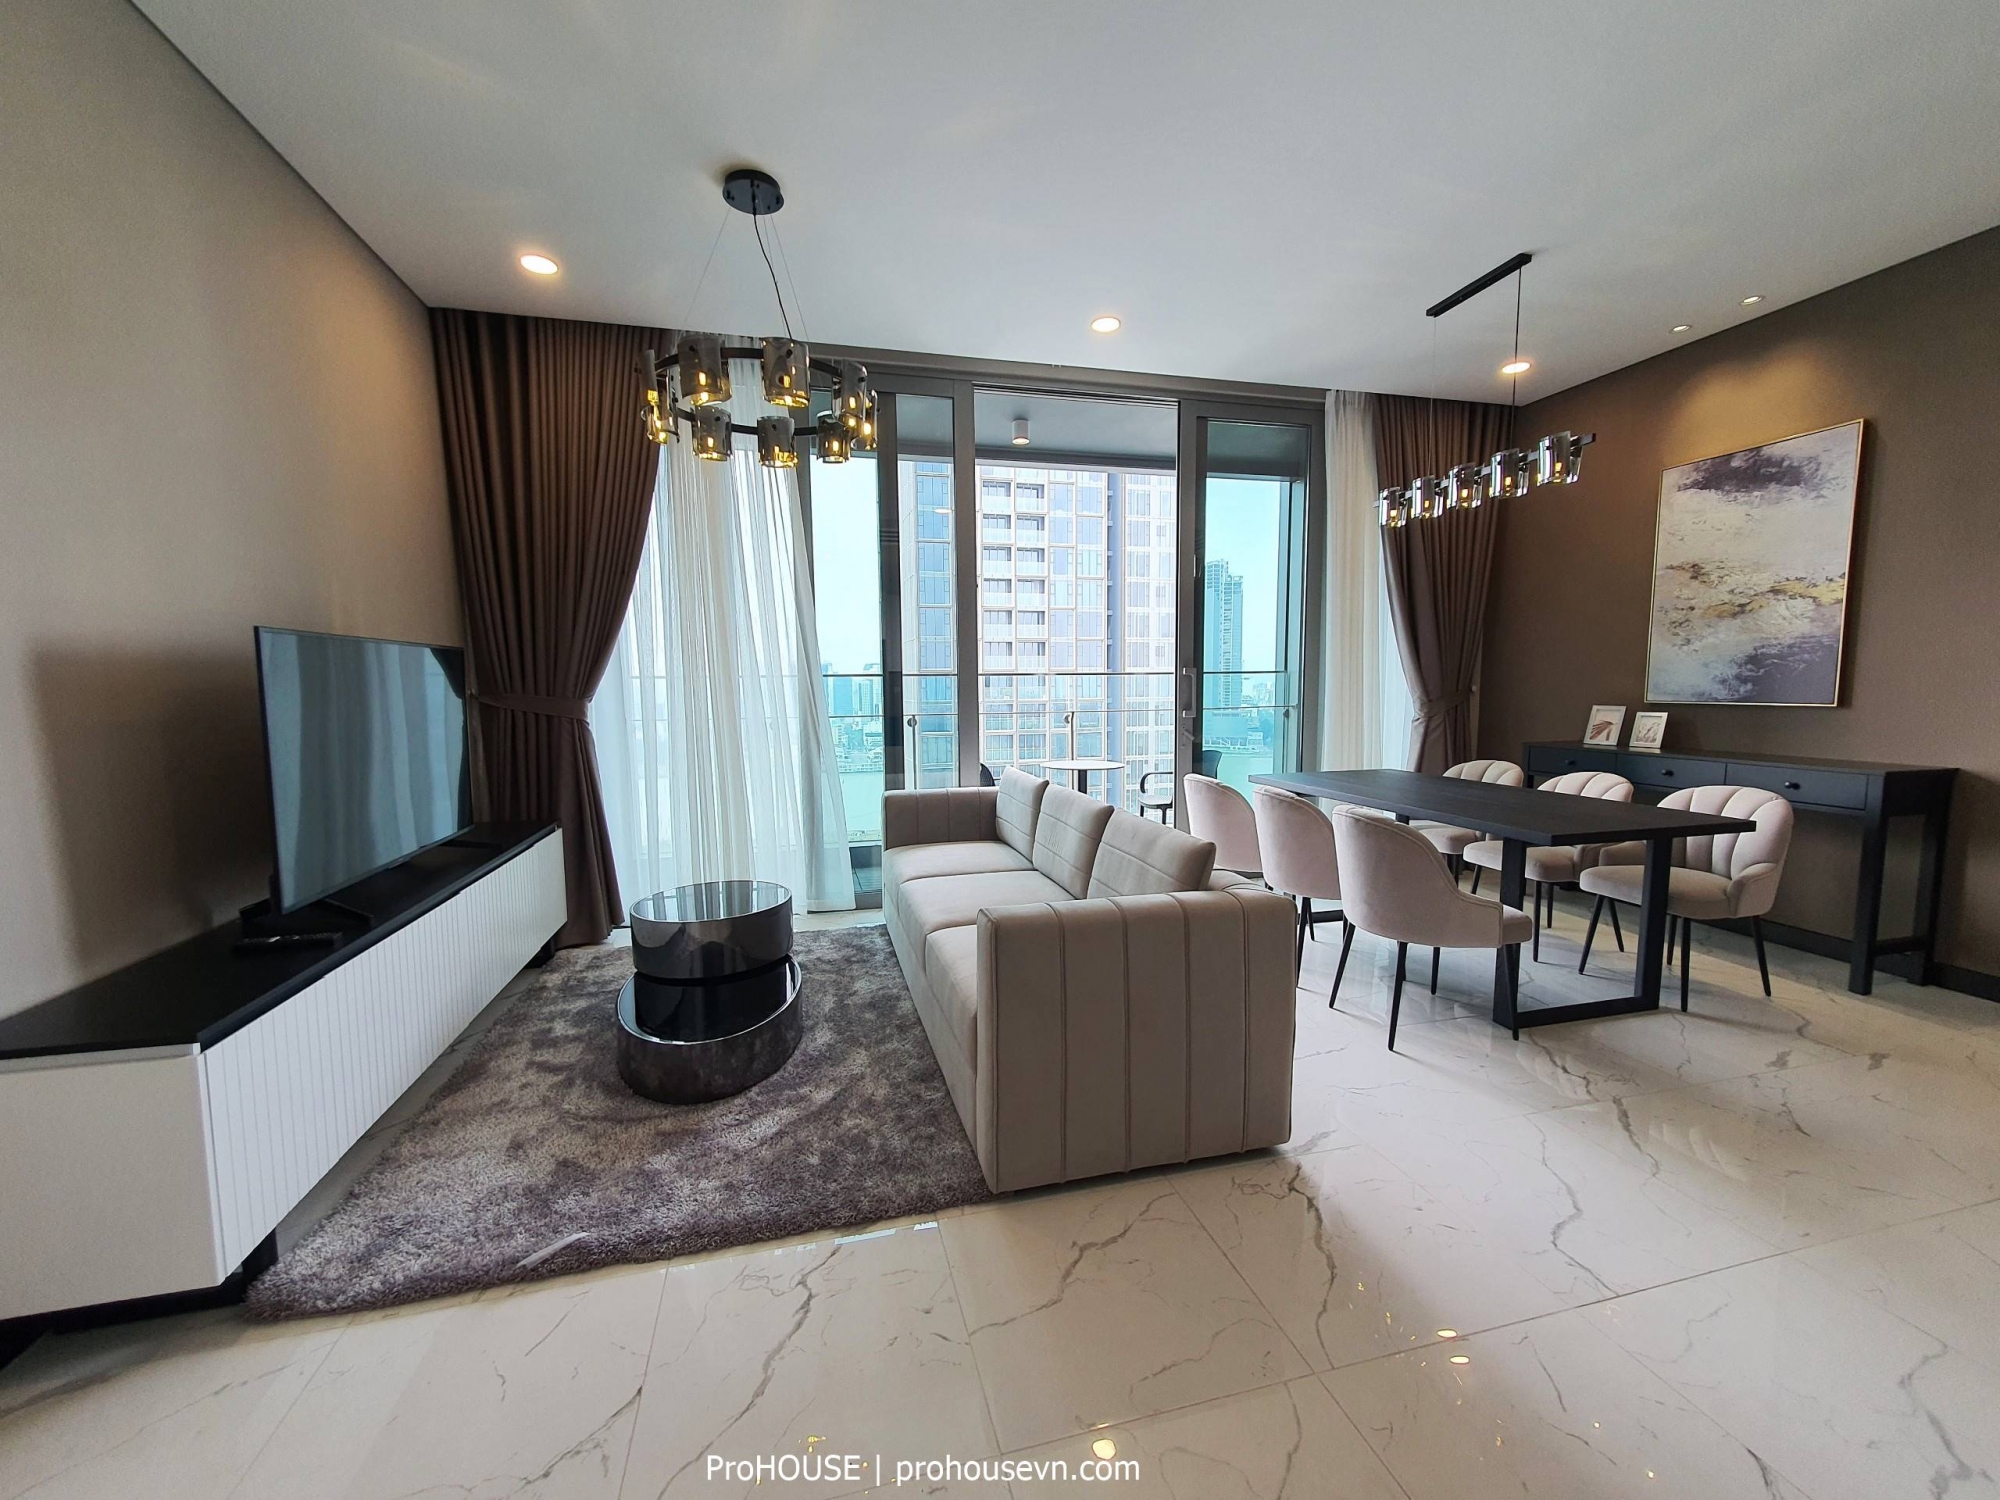 HIGH FLOOR 3BR APARTMENT IN T2A LINDEN RESIDENCES EMPIRE CITY FOR RENT